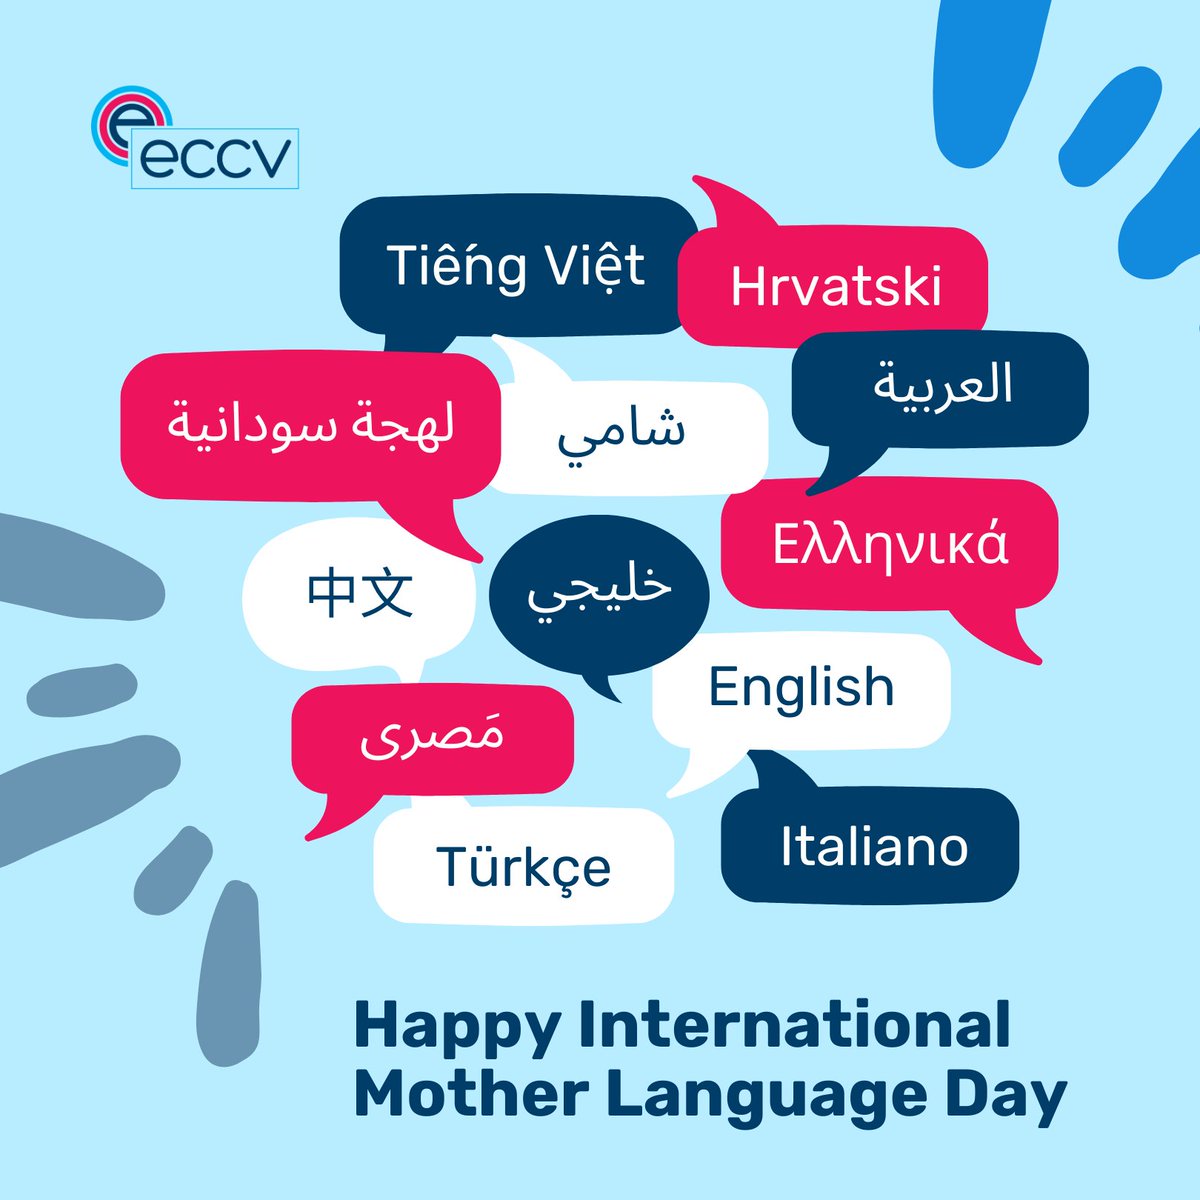 🗩 🗣️ Today is International Mother Language Day, a day to celebrate linguistic and cultural diversity & promote the importance of preserving our native languages! There are more than 260 languages spoken in Victoria. Below are just some of the languages spoken by the ECCV team.